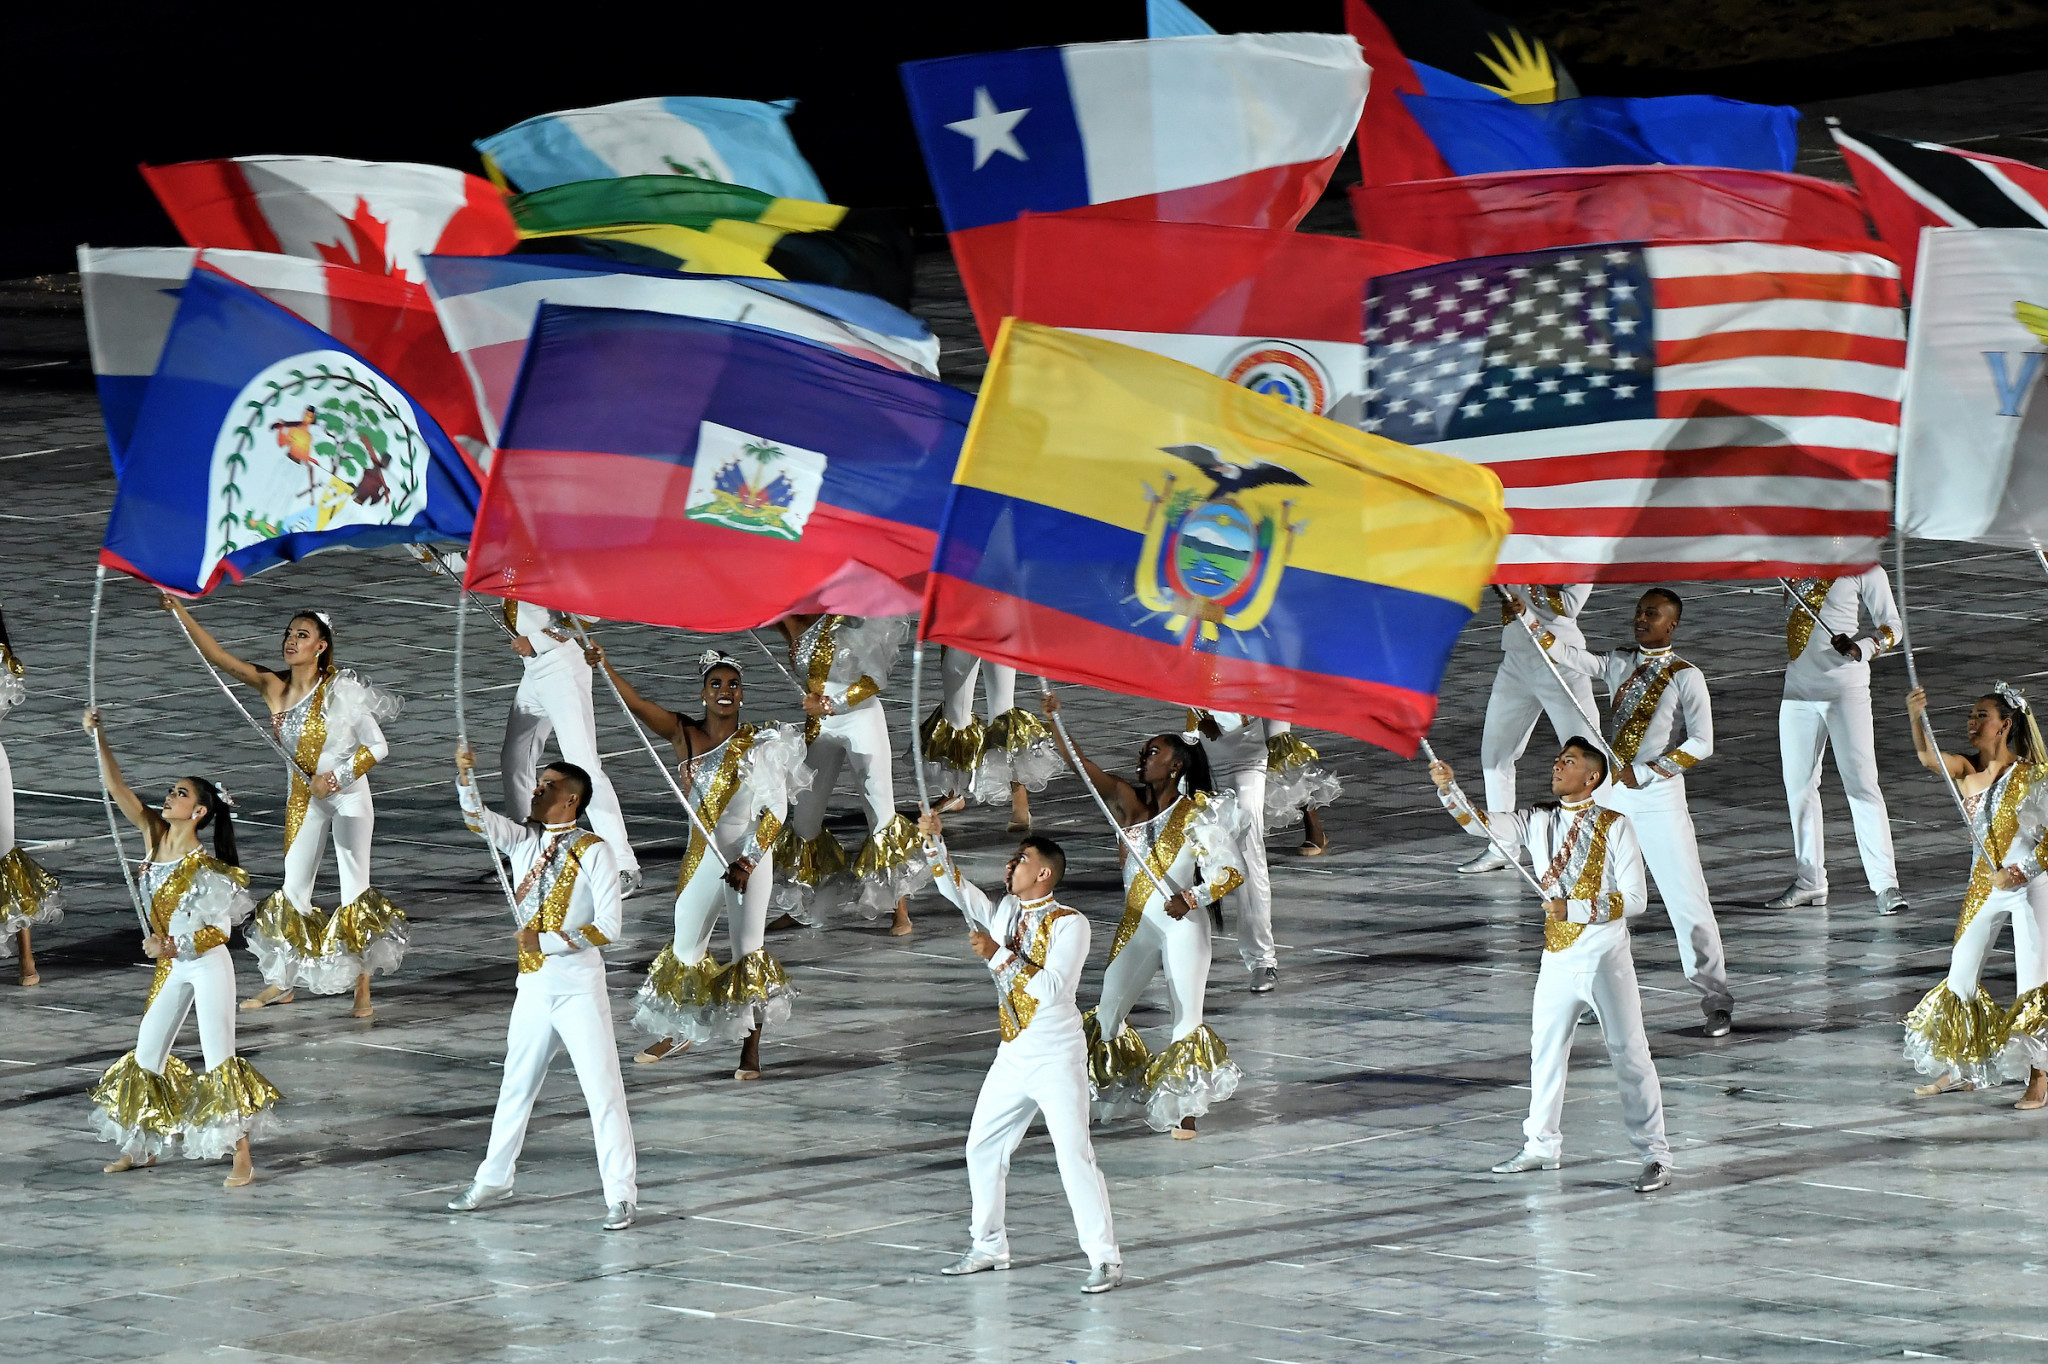 Salsa takes centre stage at Junior Pan American Games Opening Ceremony